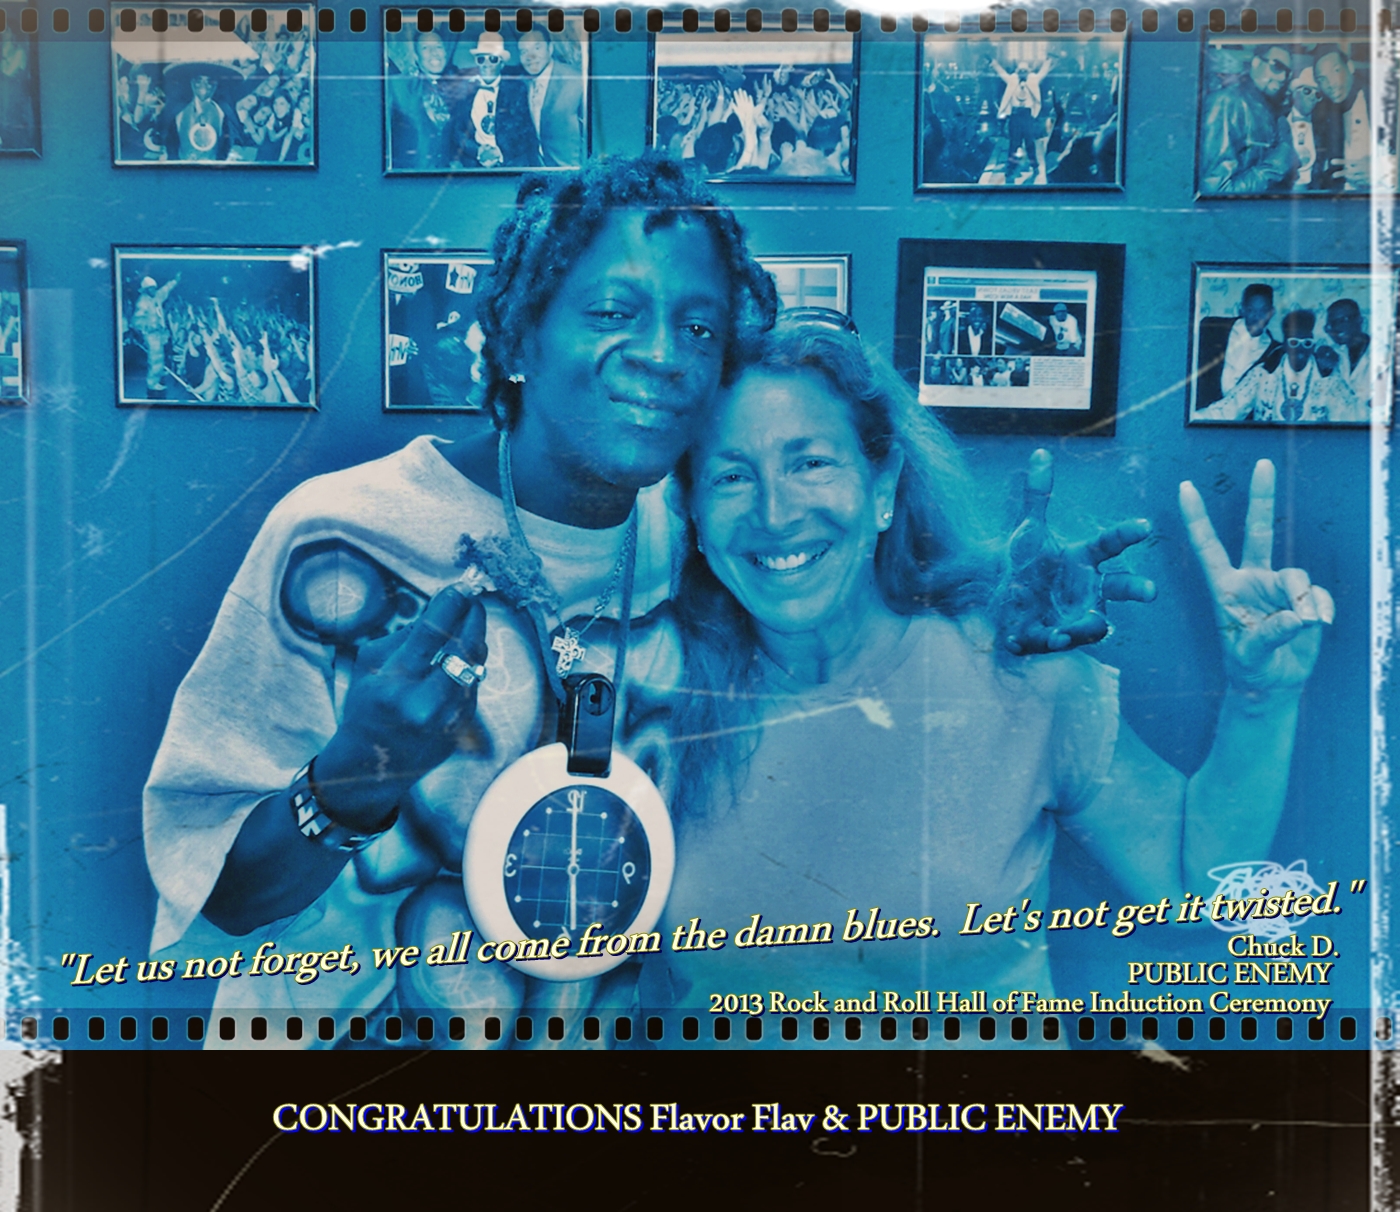 2013 Rock and Roll Hall of Fame Inductee PUBLIC ENEMY'S Flavor Flav and Daena Smoller enjoying a delicious piece of Flav's fried chicken.